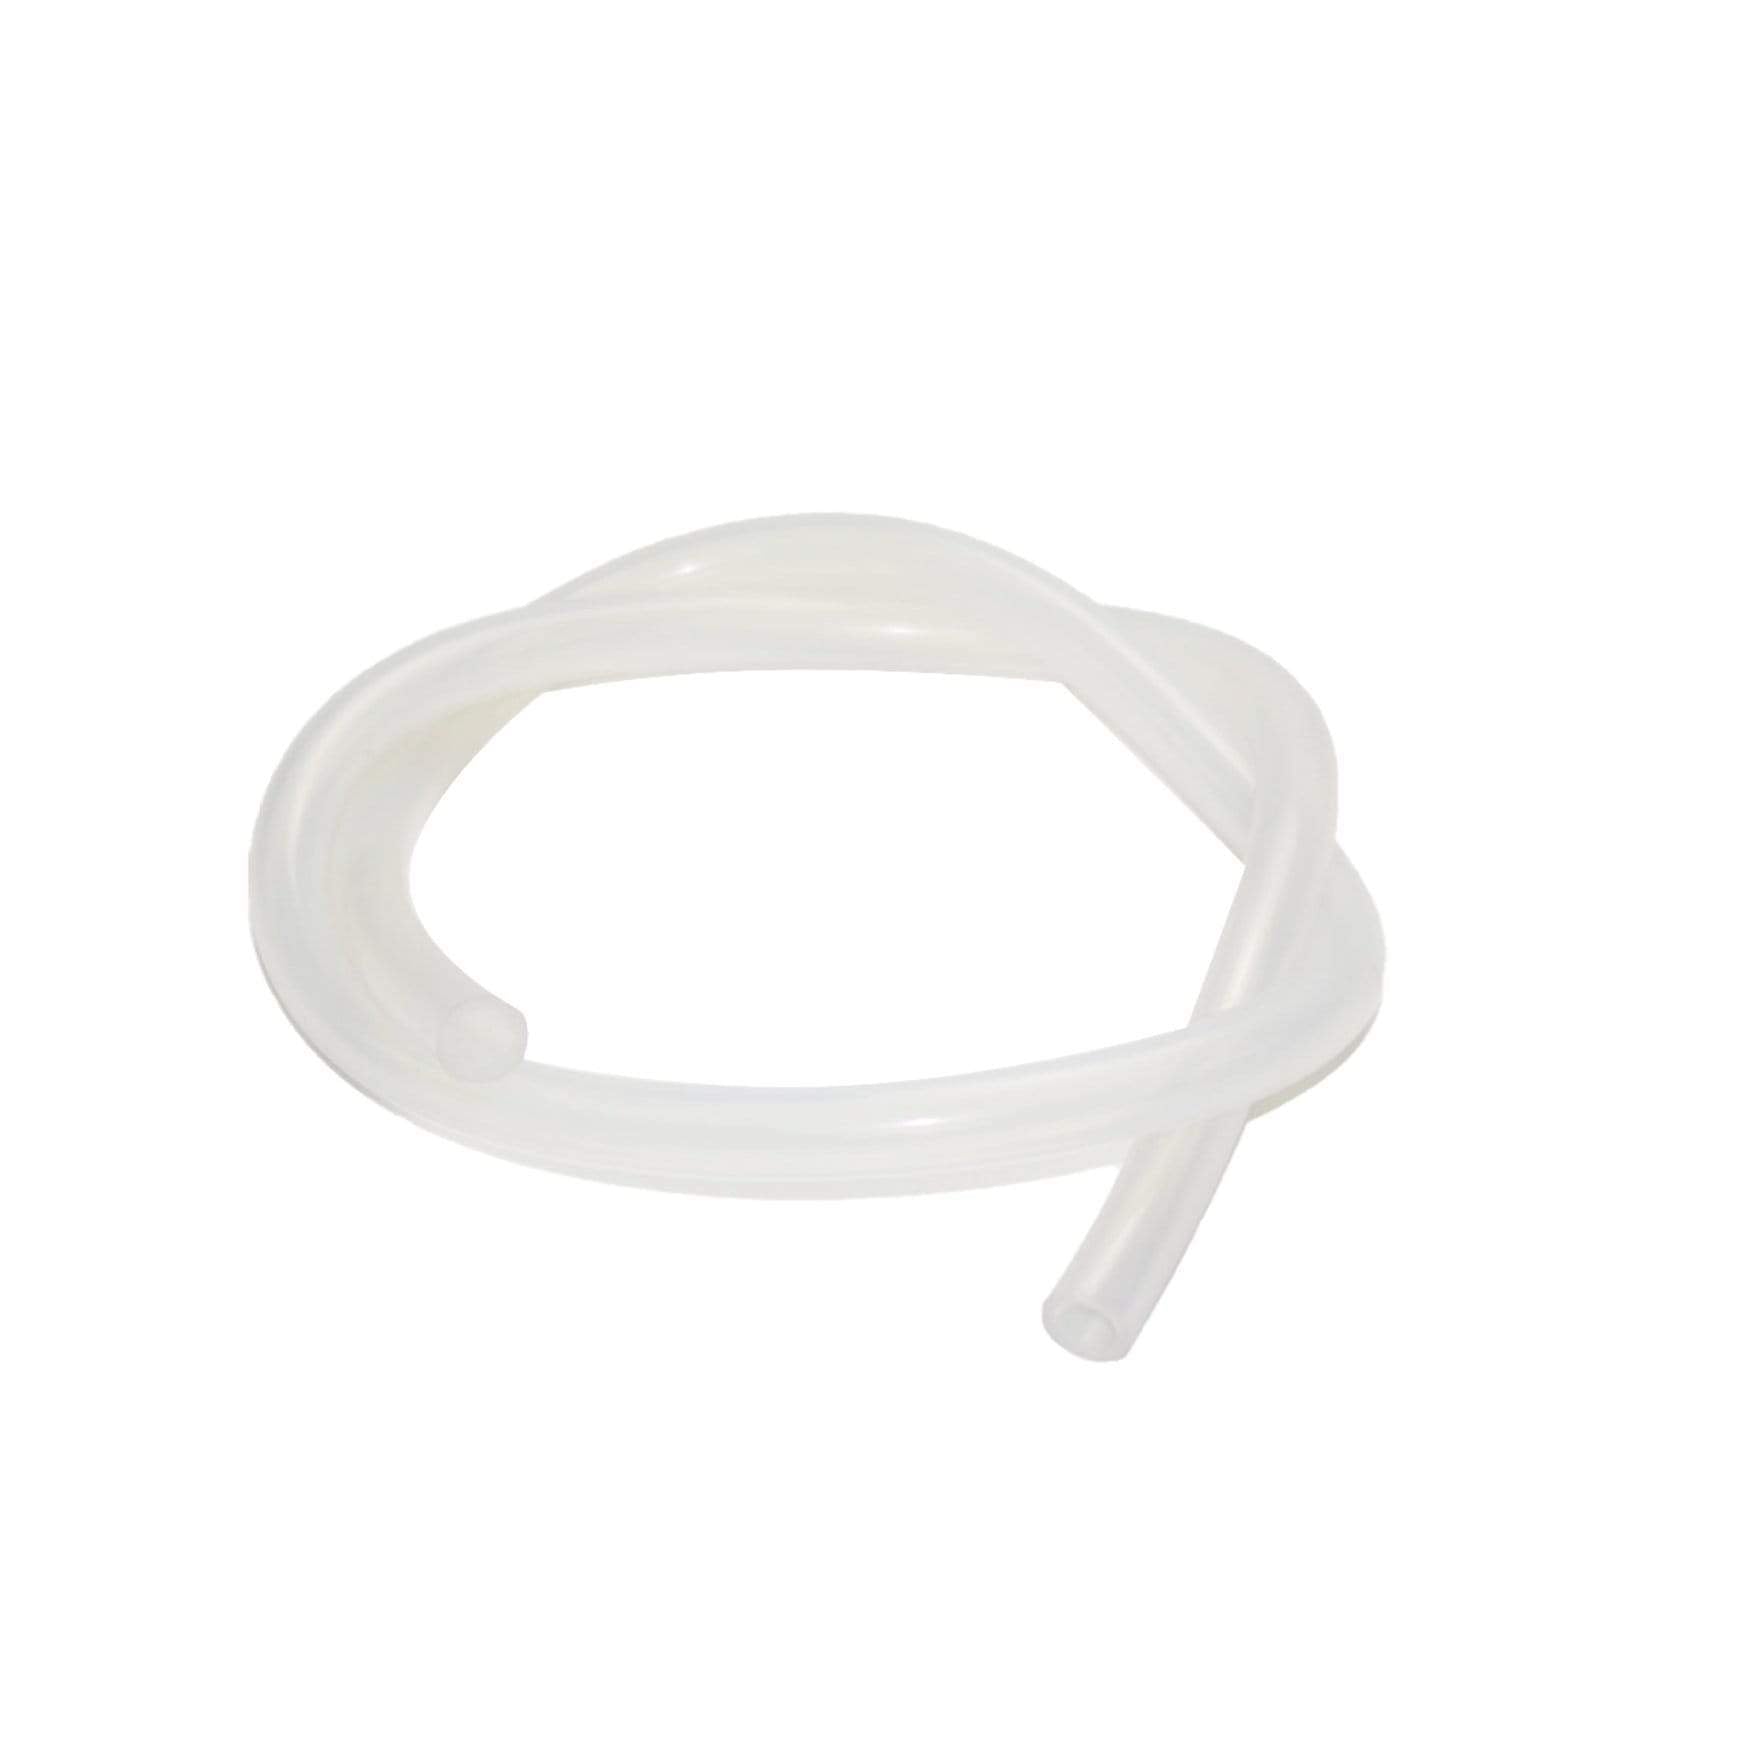 Laerdal Suction tube without tip (LPSU)